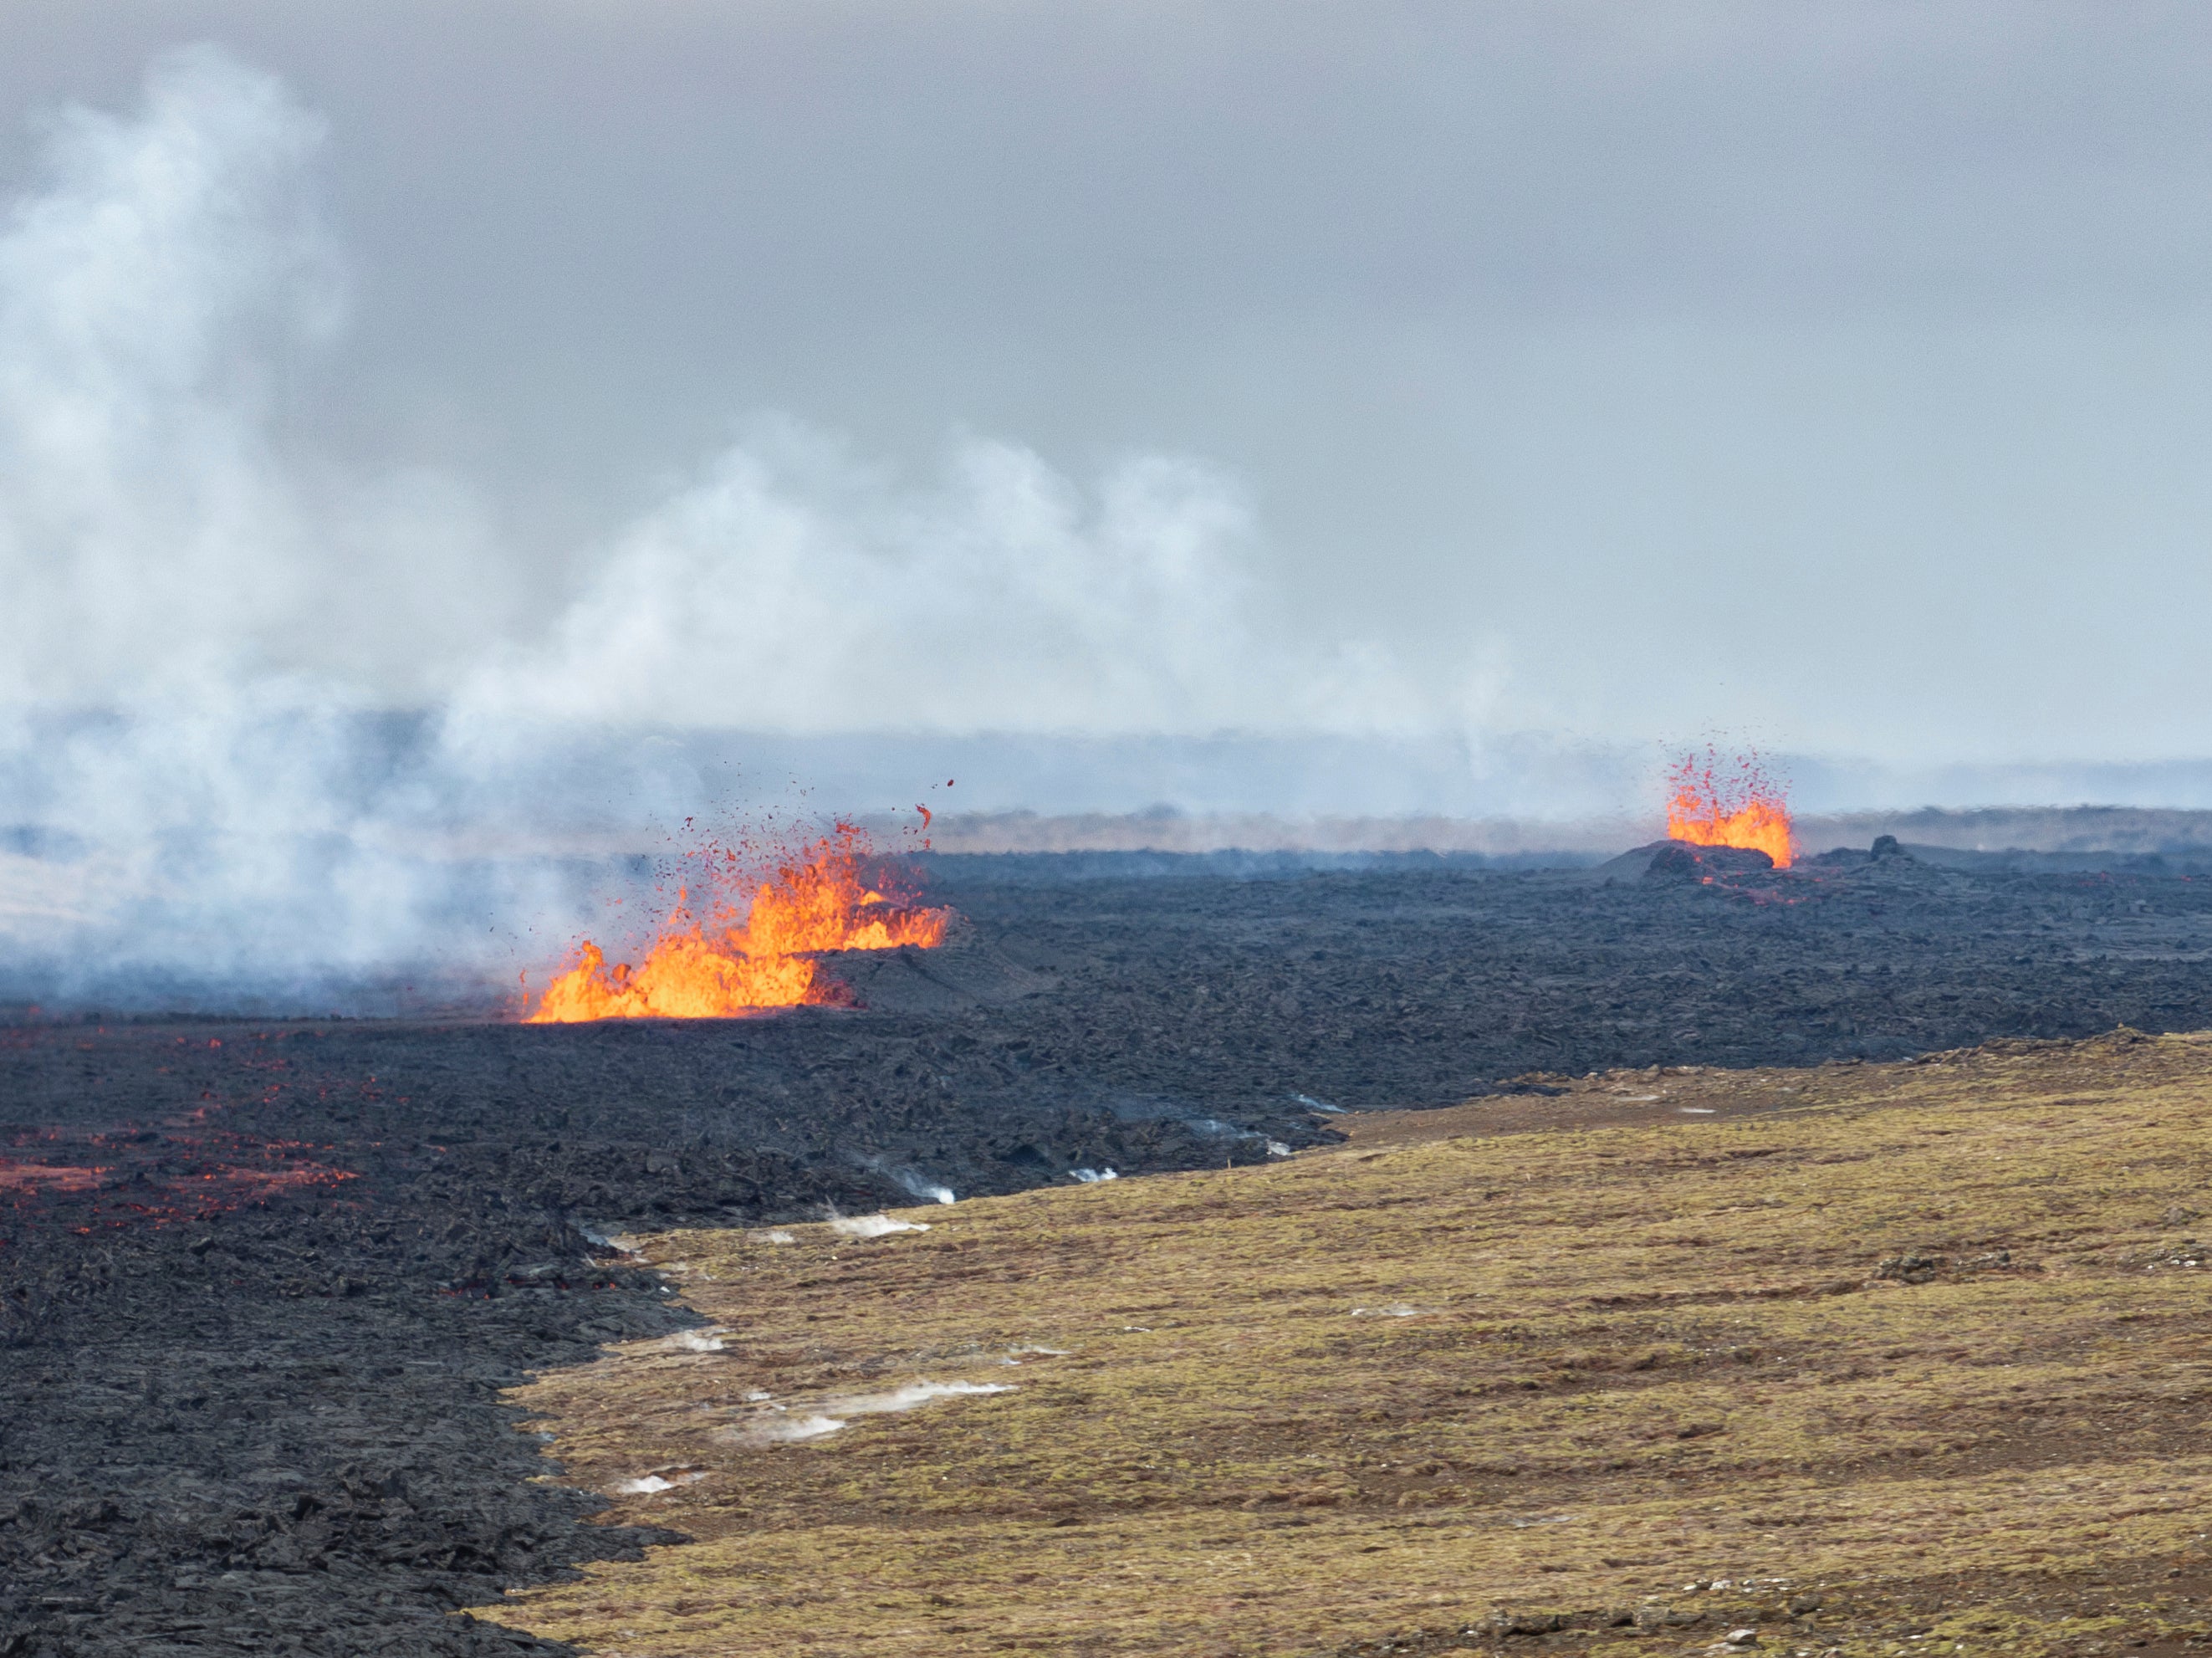 The active vents on the eruptive fissure in Iceland, pictured on Sunday